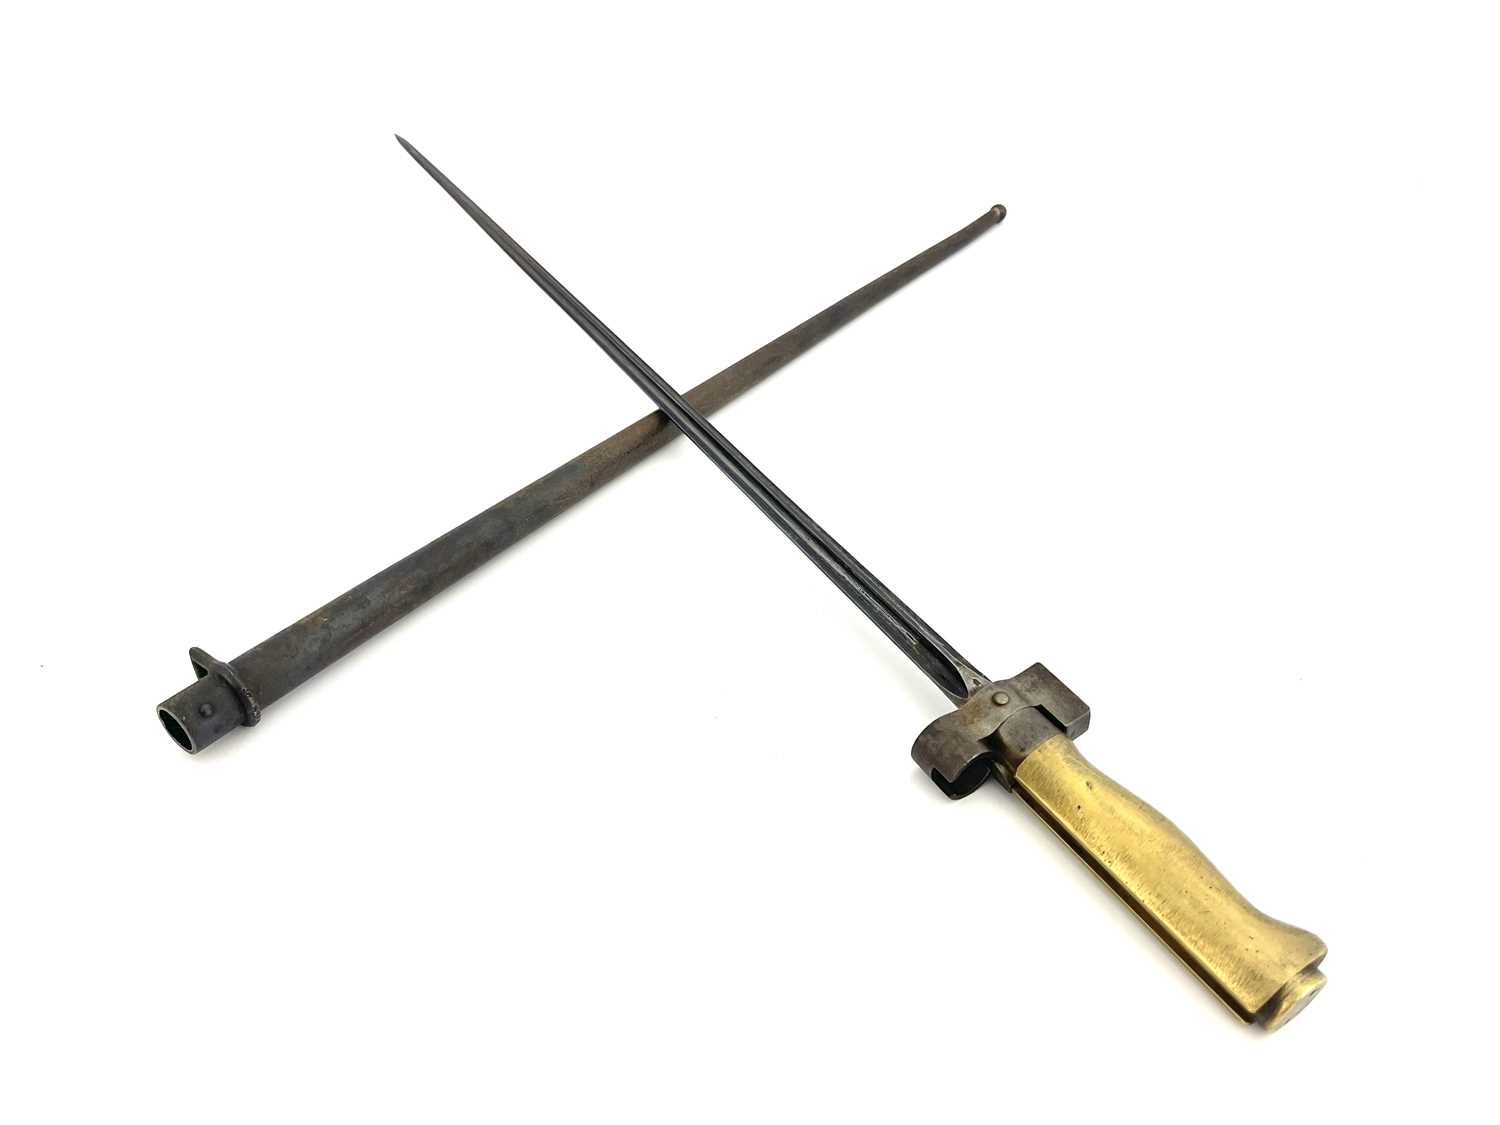 A French M1886 Lebel modified sword bayonet, cruciform blade, brass grip, quillon removed, housed in